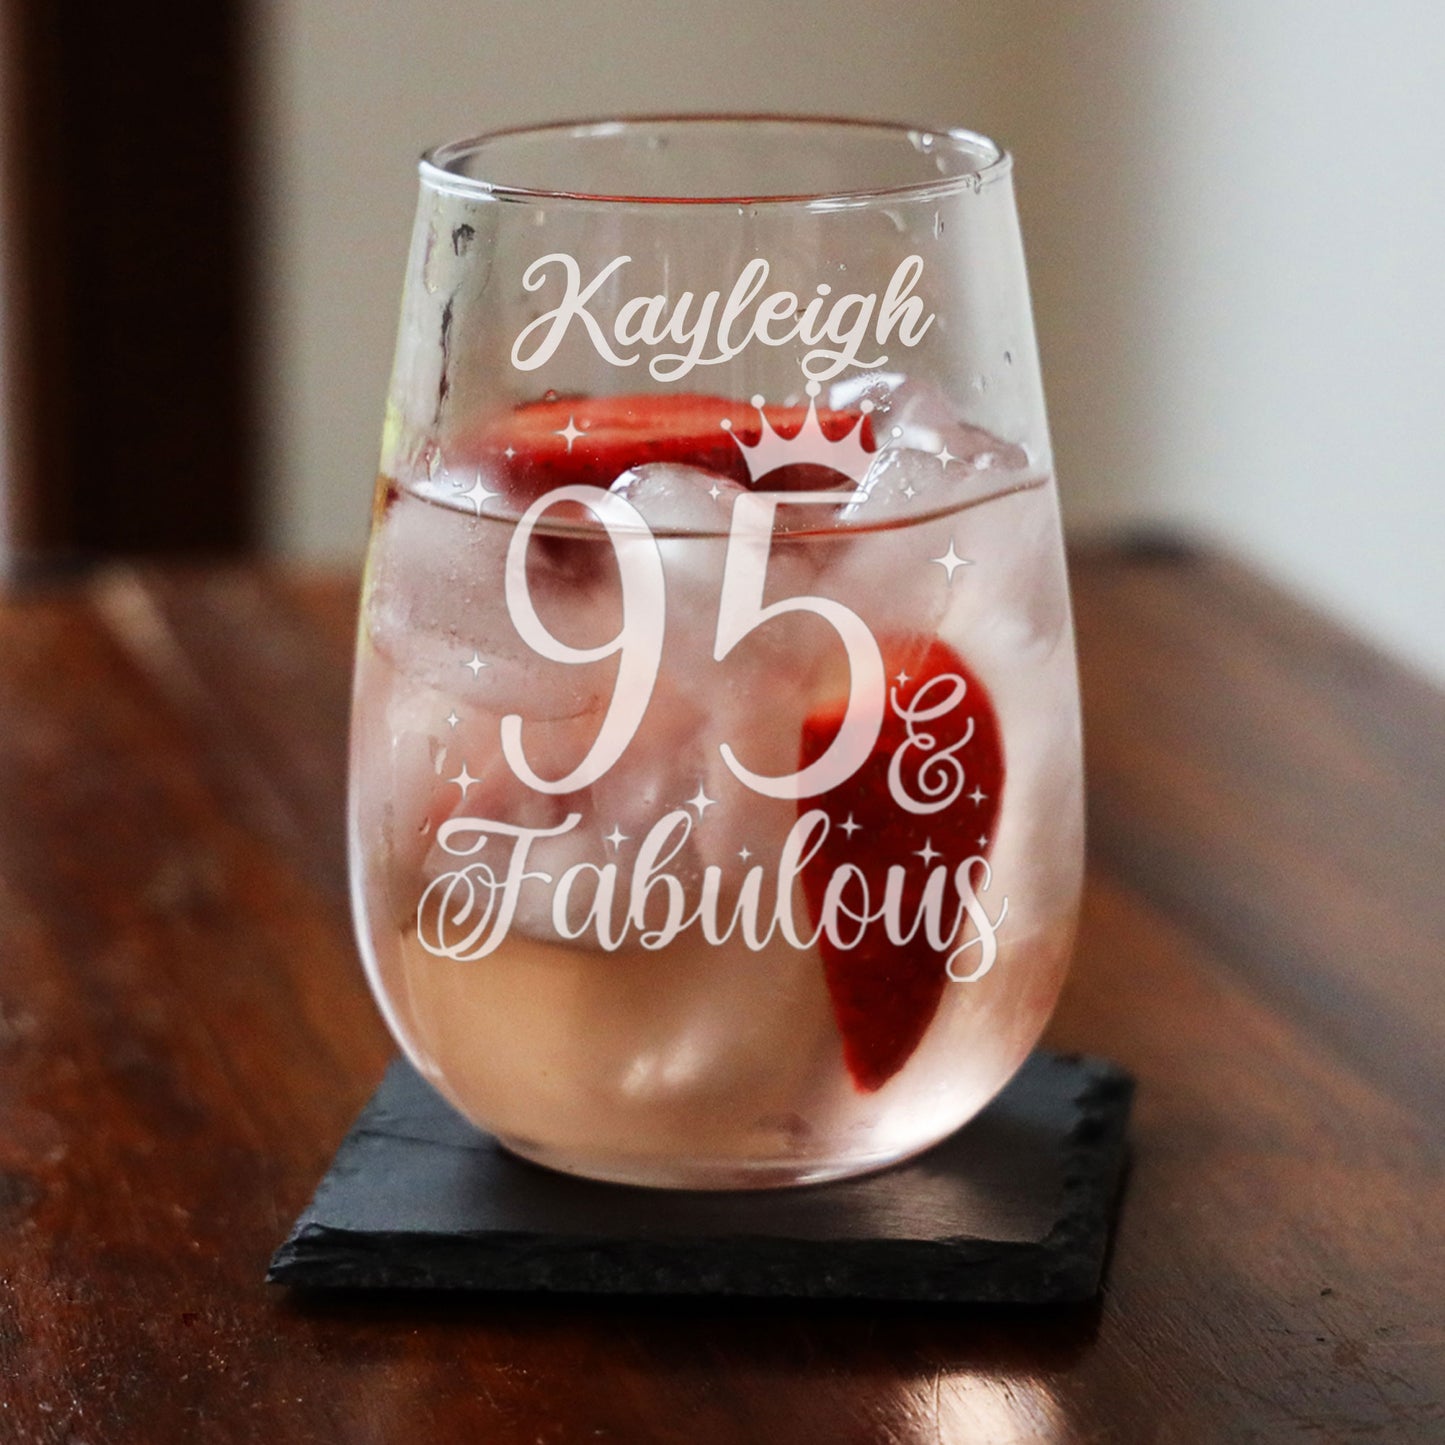 95 & Fabulous Engraved Stemless Gin Glass and/or Coaster Set  - Always Looking Good -   